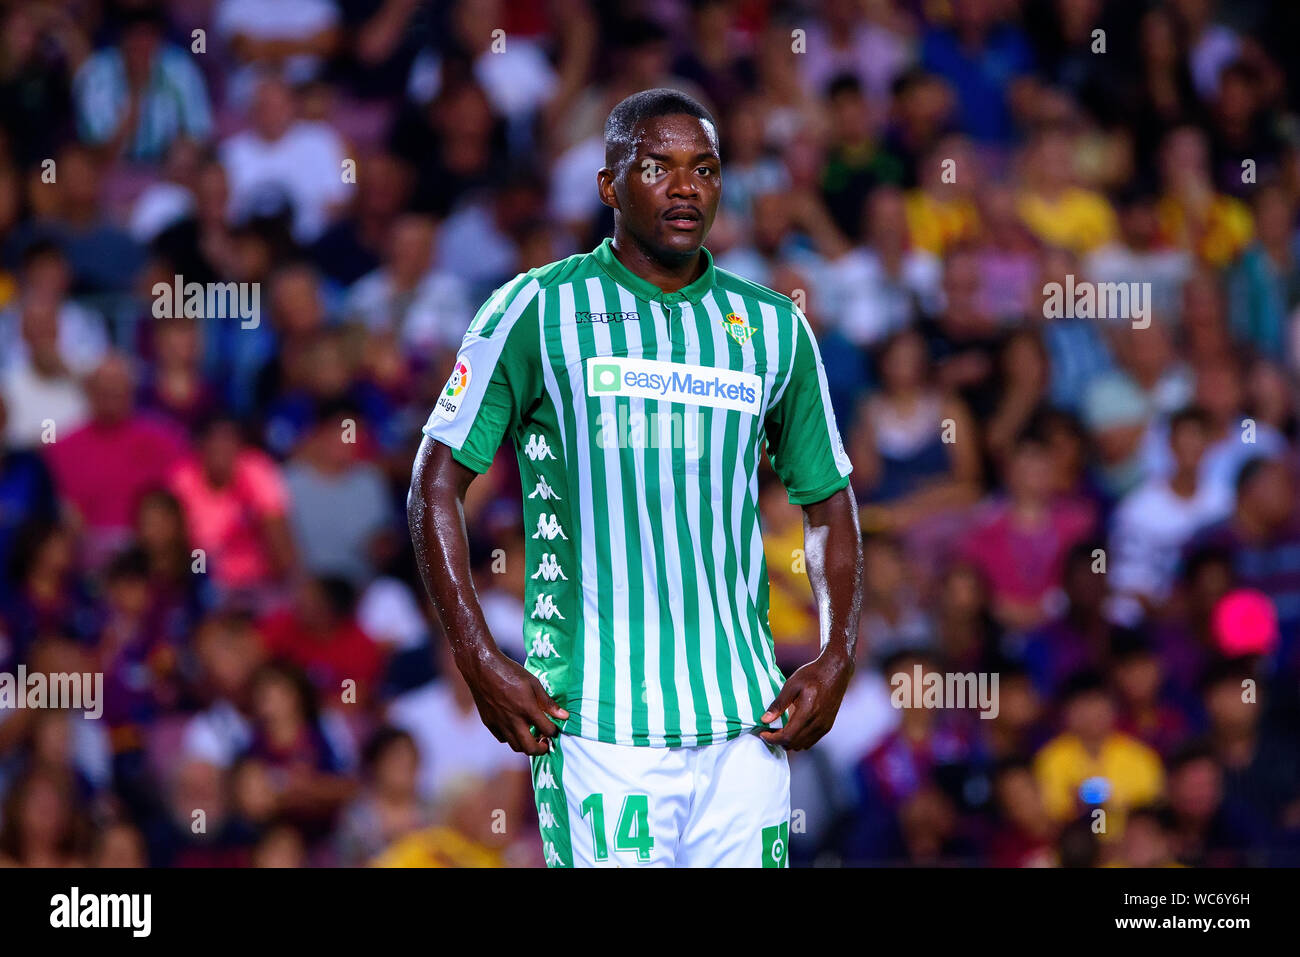 BARCELONA - AUG 25: William Carvalho plays at the La Liga match between FC Barcelona and Real Betis at the Camp Nou Stadium on August 25, 2019 in Barc Stock Photo